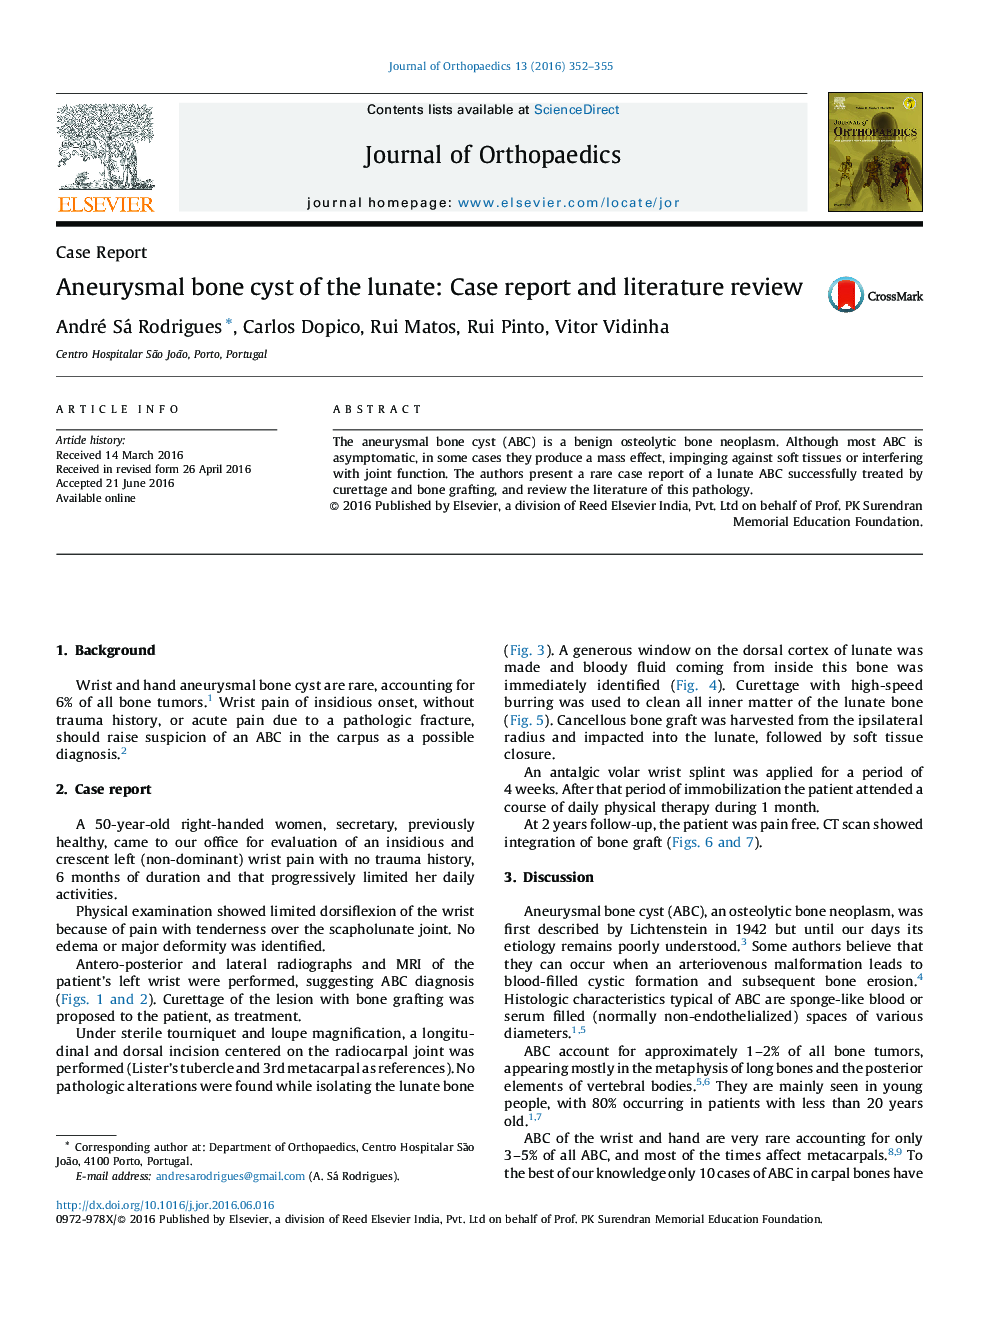 Aneurysmal bone cyst of the lunate: Case report and literature review